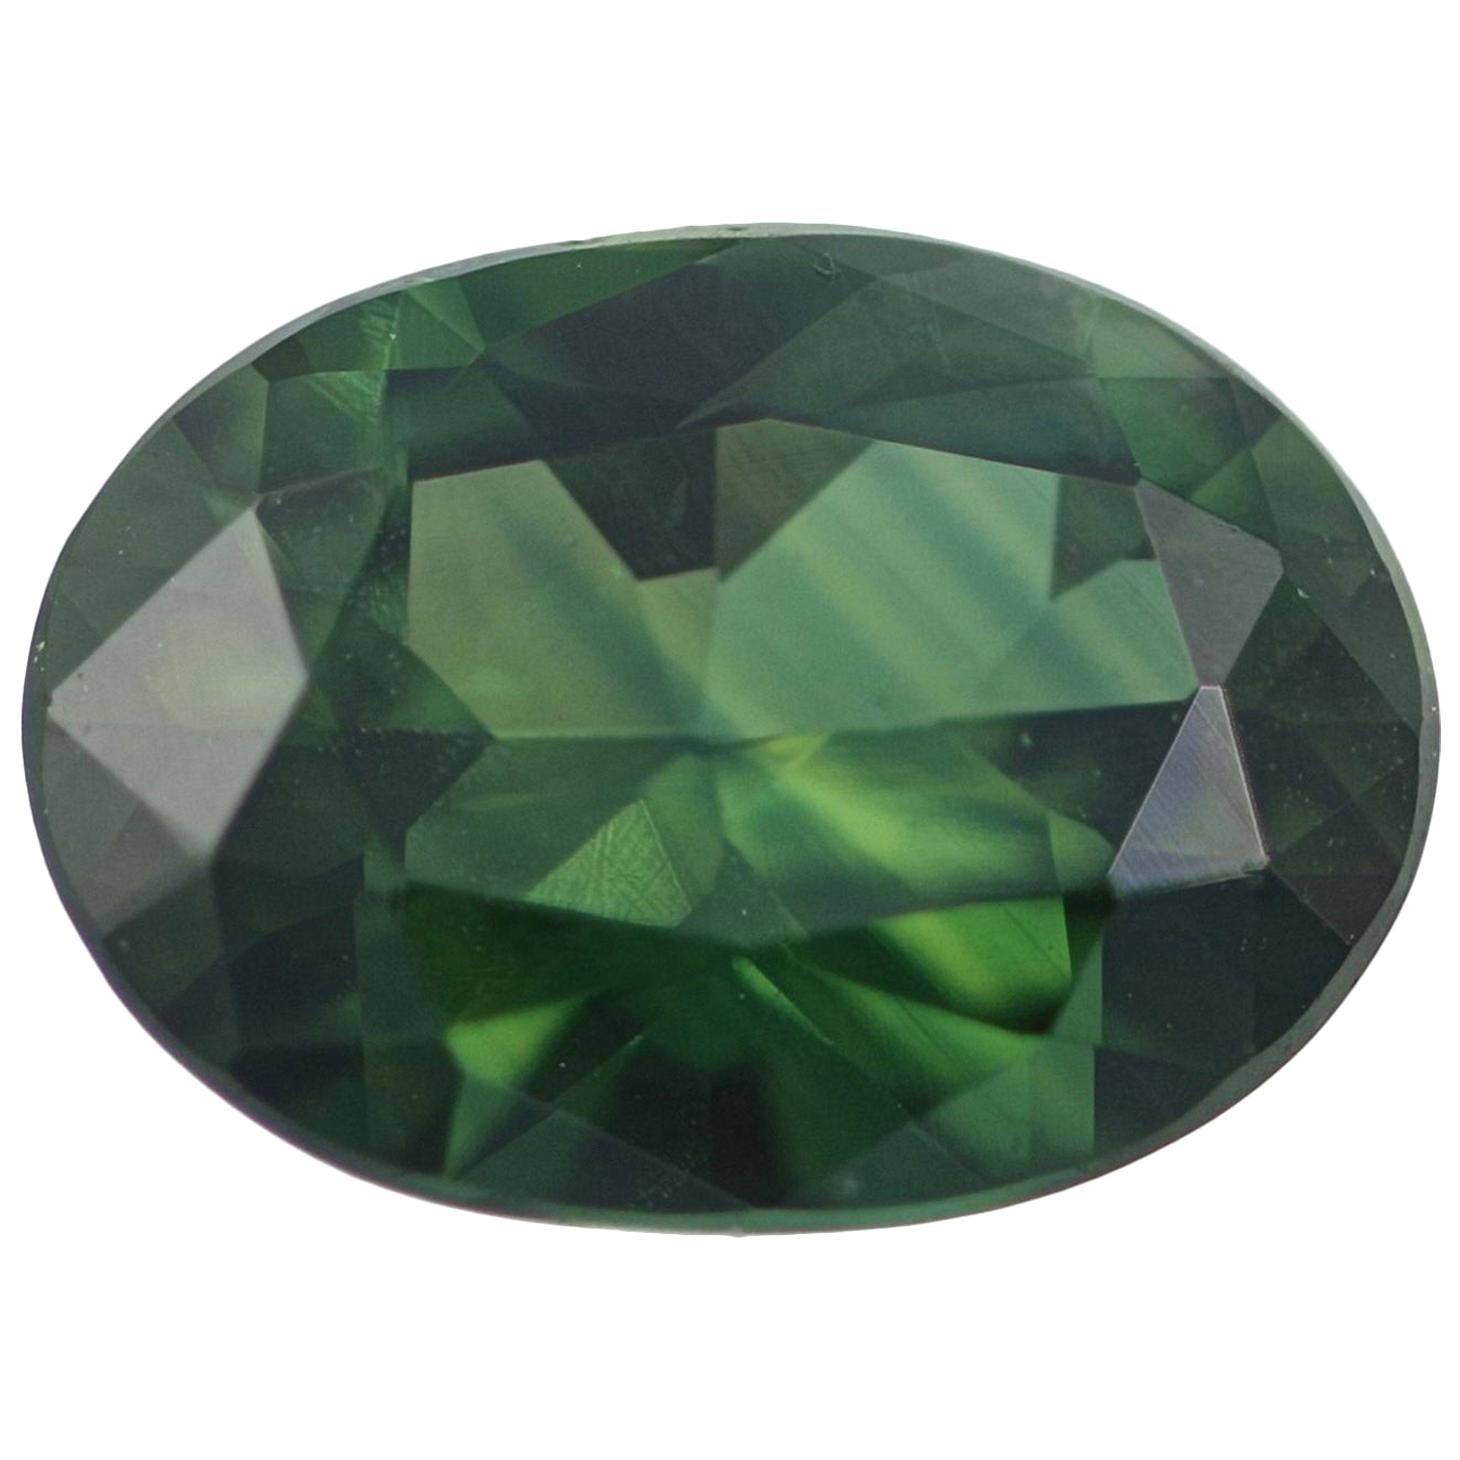 Loose Sapphire, Oval Cut 1.22 Carat Green Solitaire For Sale